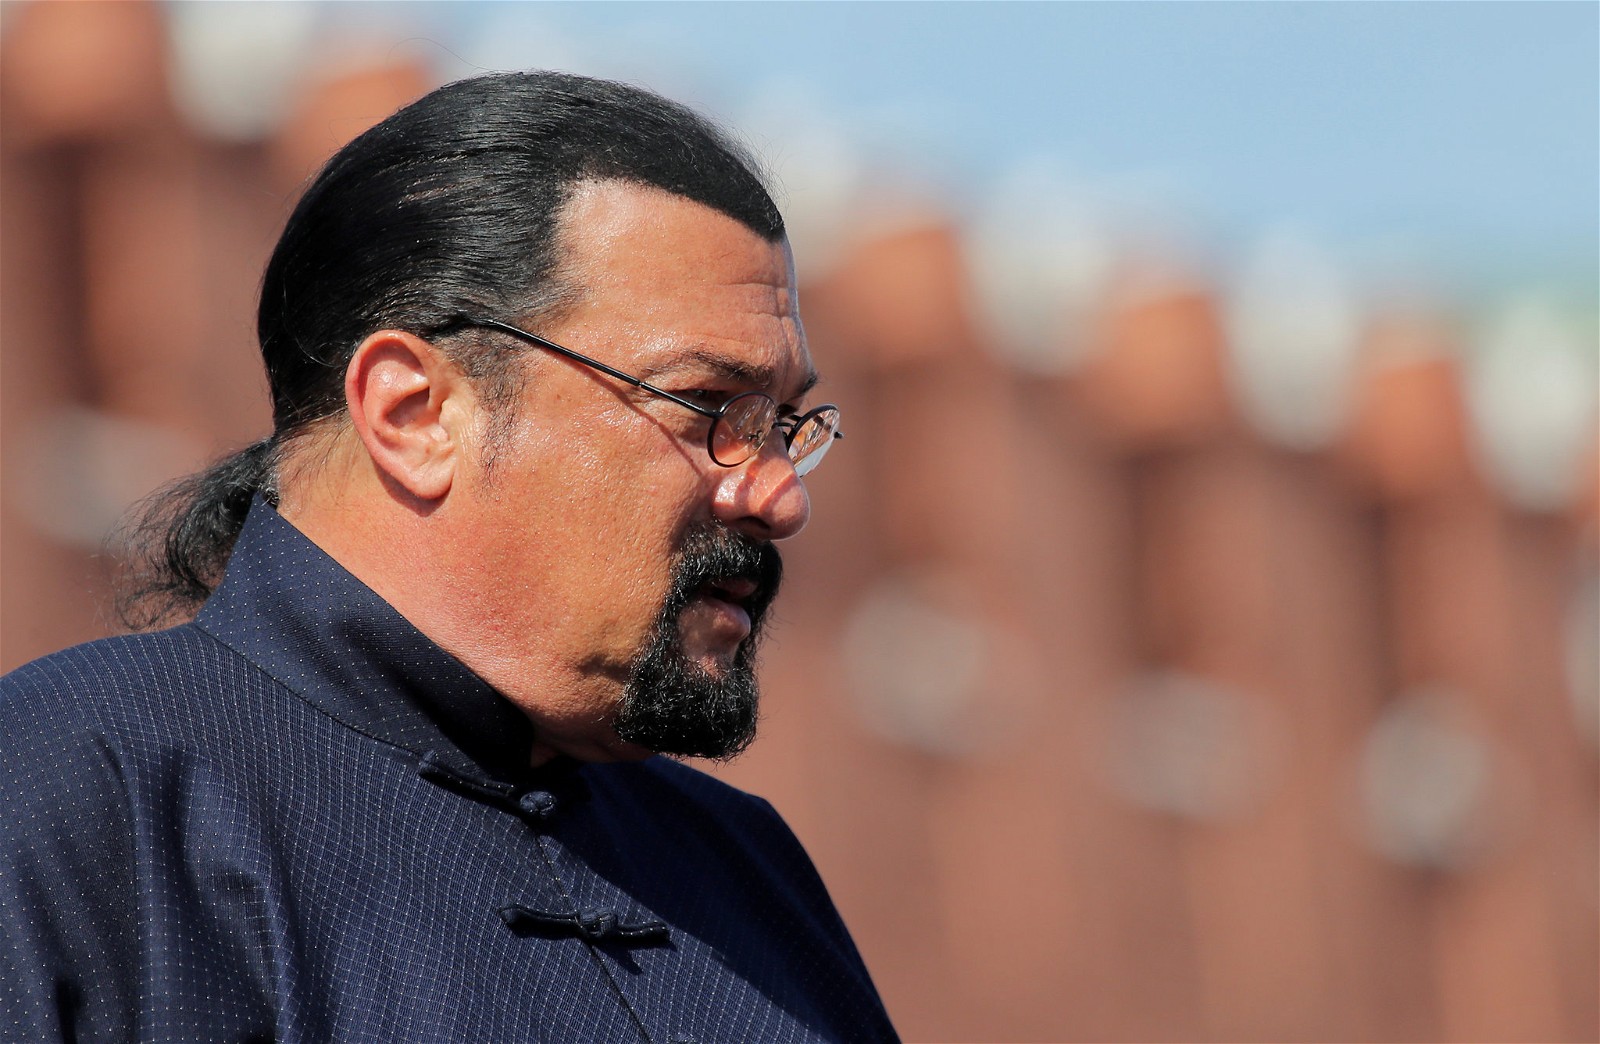 Steven Seagal, Martial artist and actor